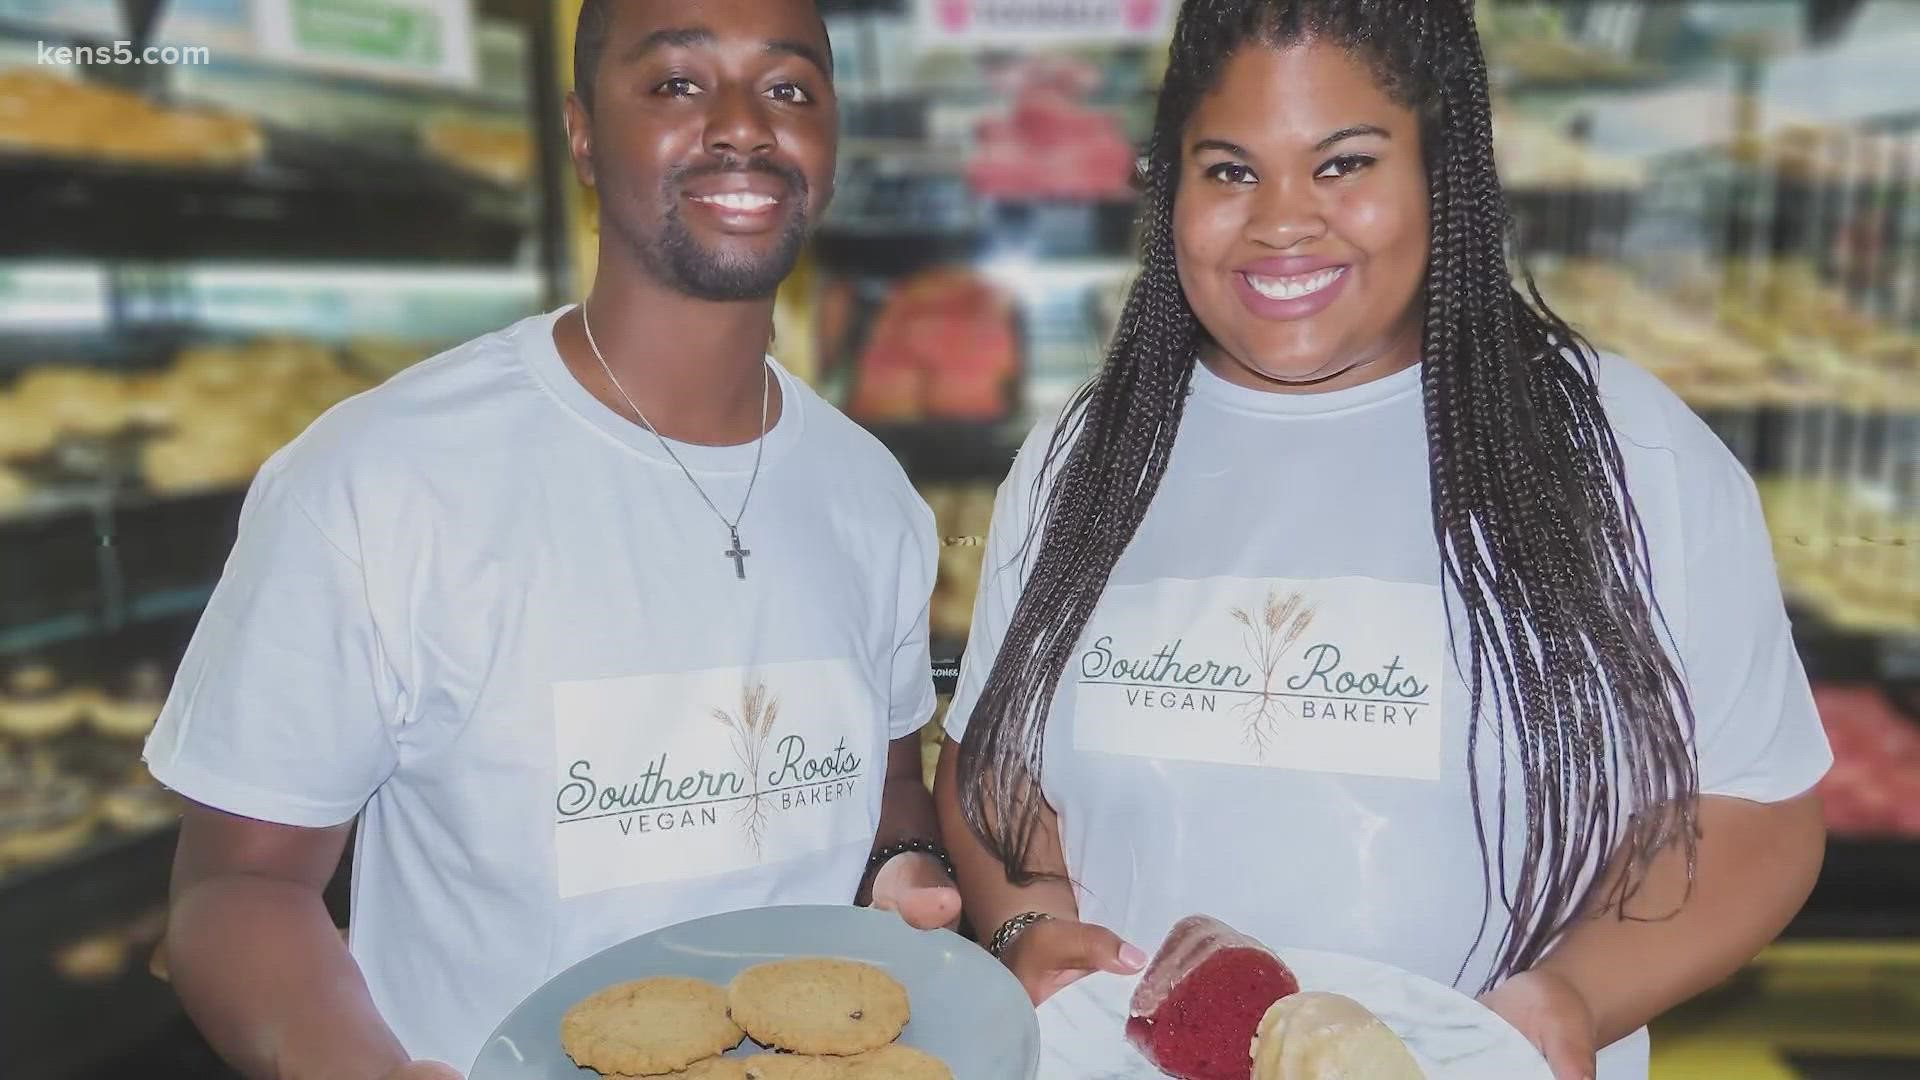 Since starting out in 2019 -- San Antonio's Southern Roots Vegan Bakery has been nationally recognized for their sweet treats.